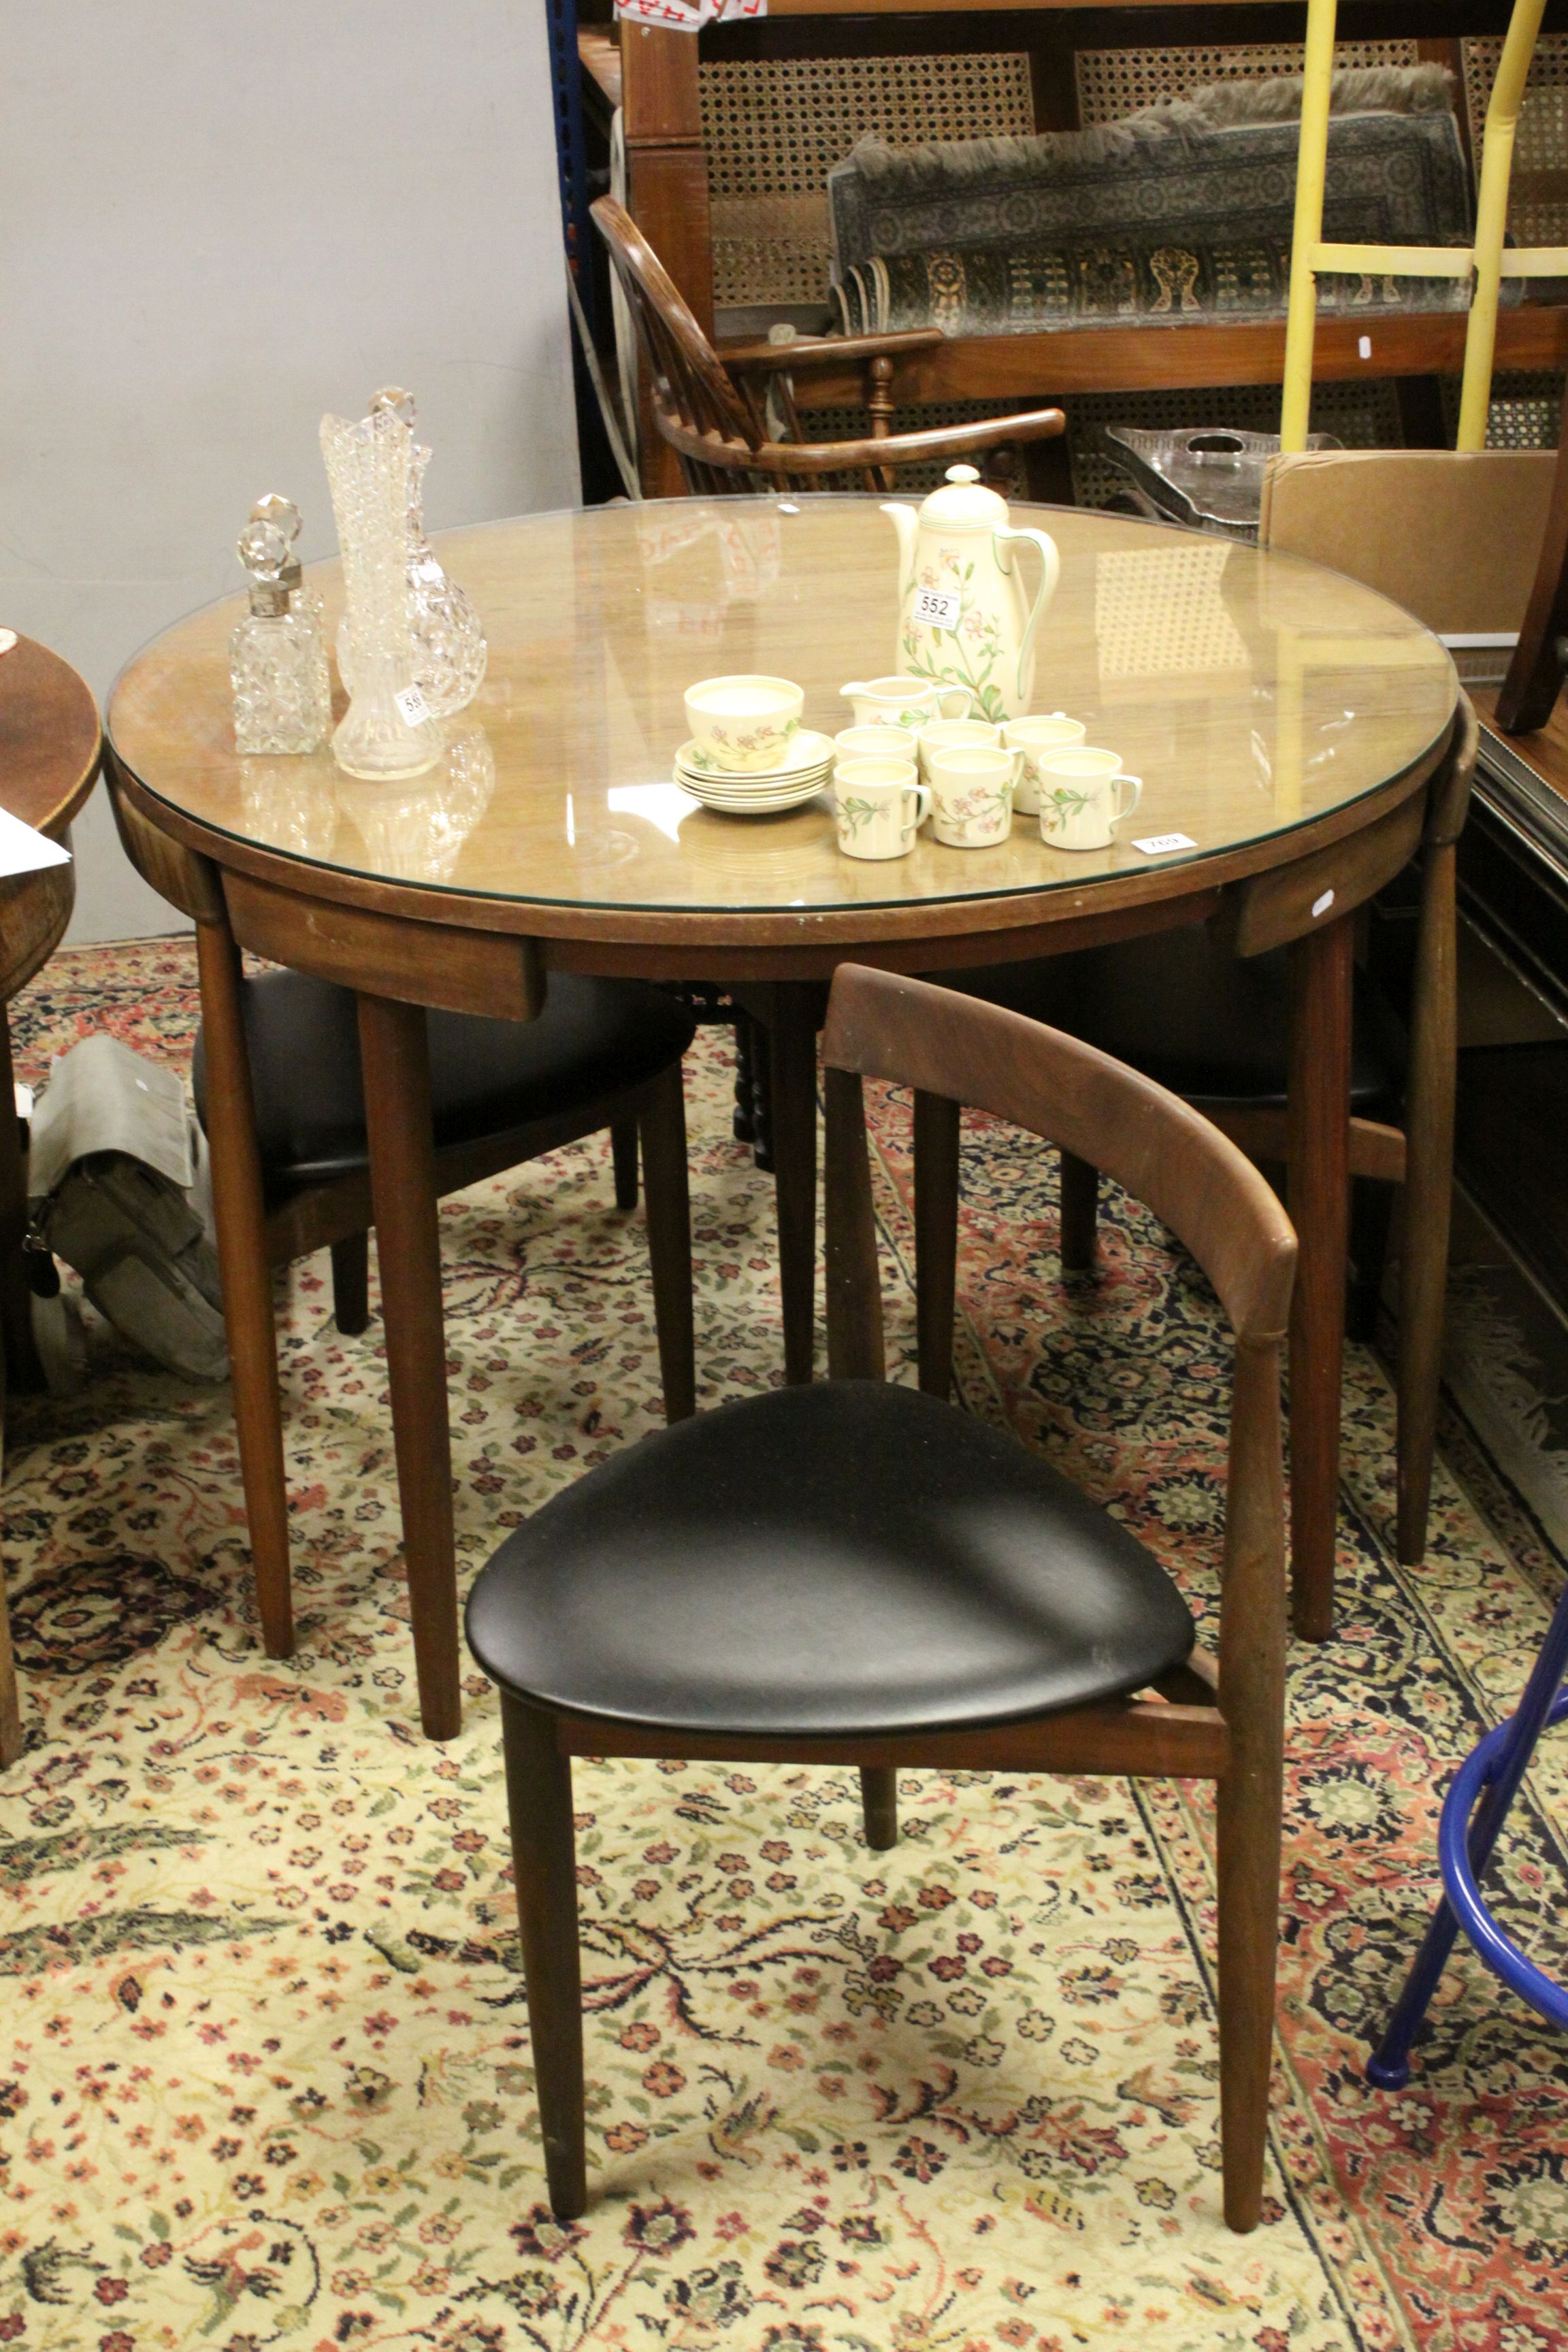 Retro 1960's Danish Teak Circular Dining Table with Glass Top and Four Curved Back matching